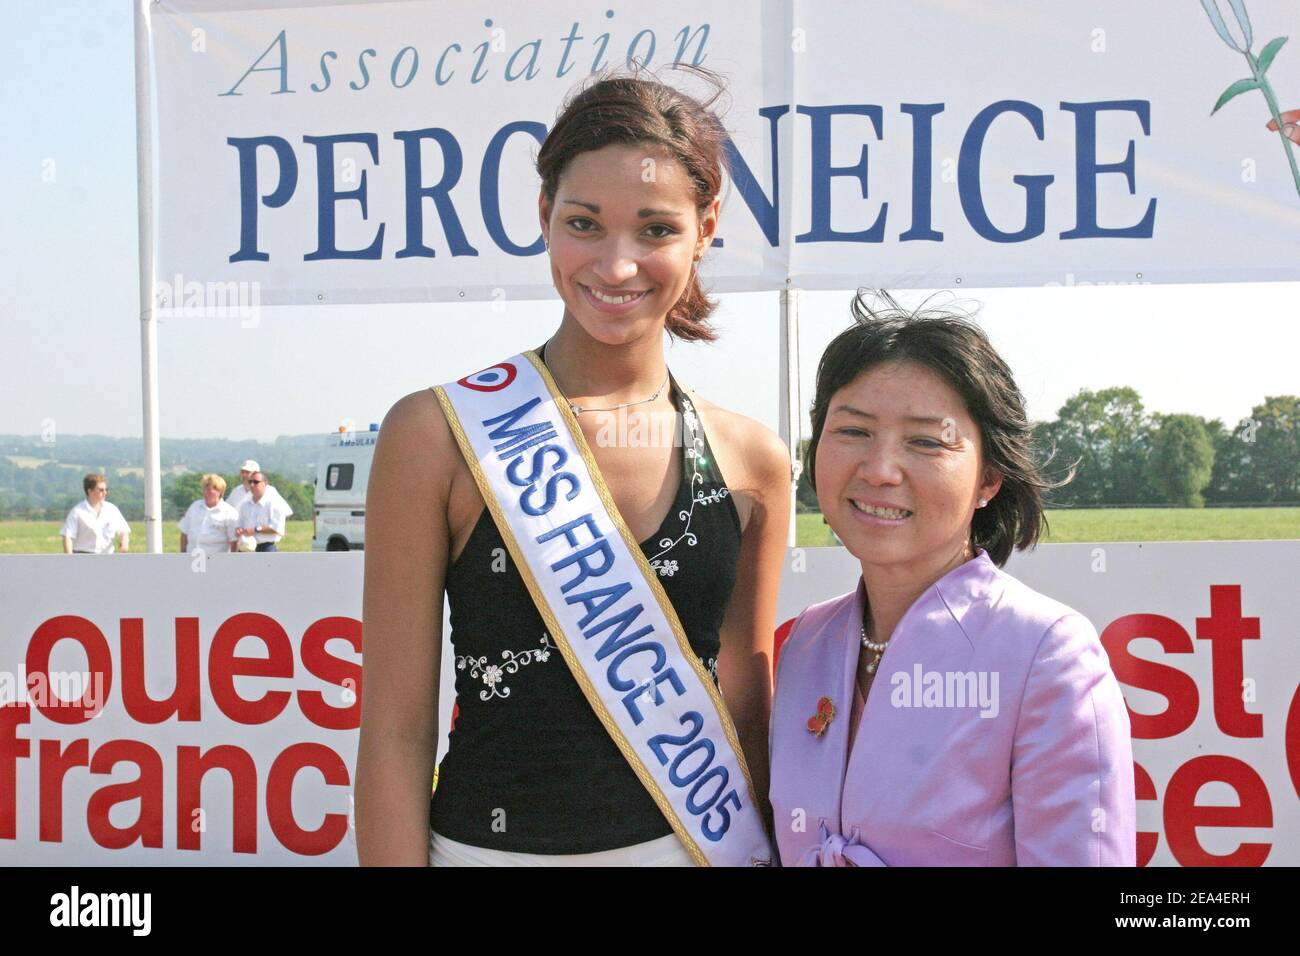 Miss France 2005 Cindy Fabre and French president Jacques Chirac's adoptive daughter Anh Dao Traxel pictured at the annual charity meeting for the benefit of the association 'Perce-Neige' created by late actor Lino Ventura, in Moulins-la-Marche, Normandy-France on June 26, 2005. Photo by Benoit Pinguet/ABACA. Stock Photo